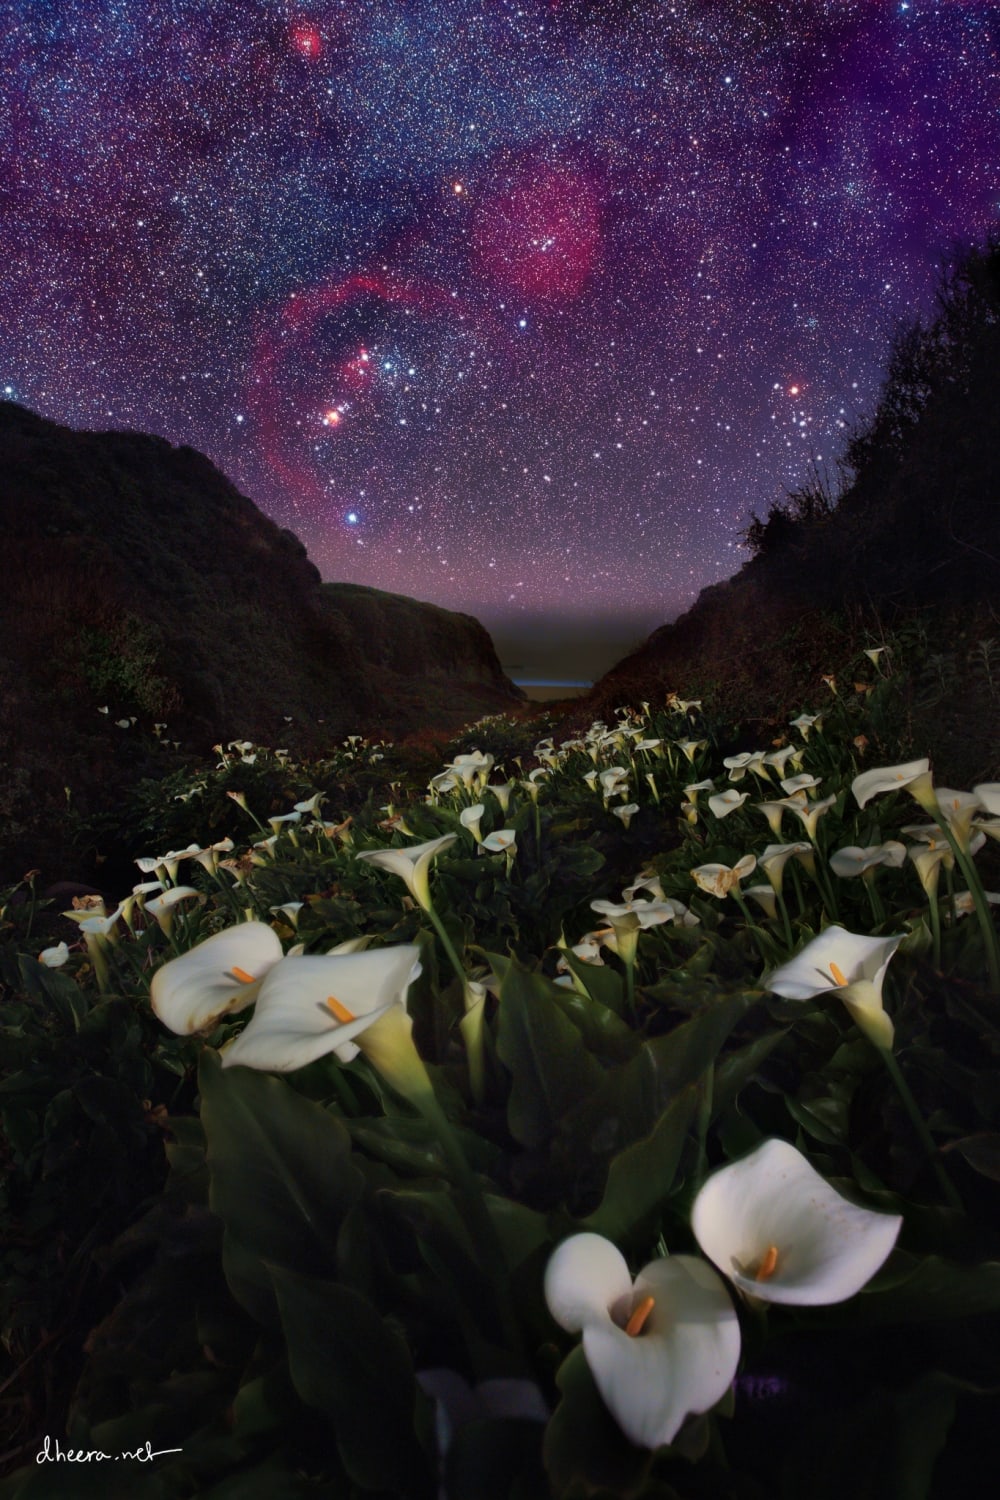 Orion and several nebulae over Calla Lilies on the California coast